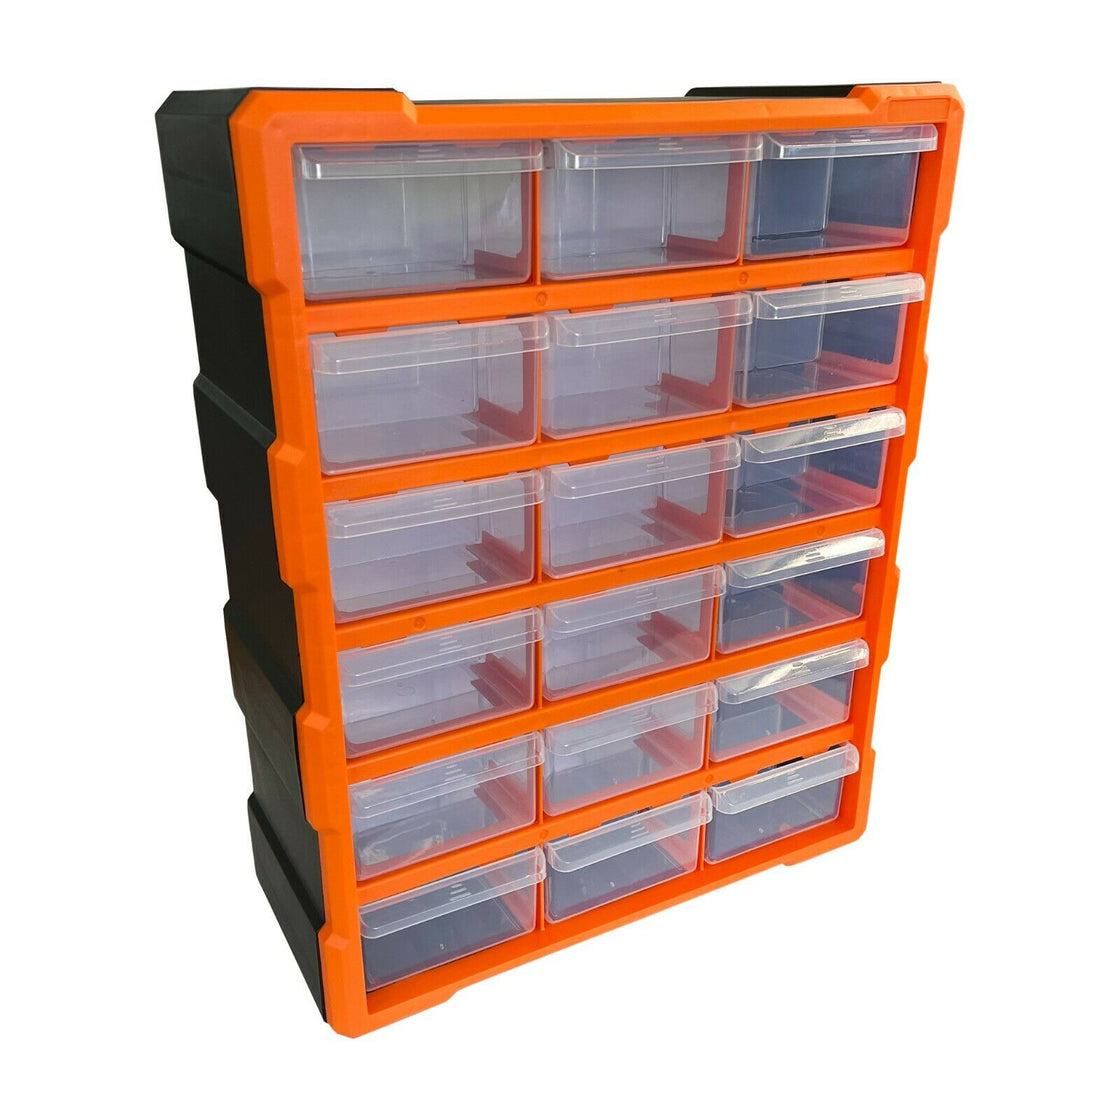 LARGE PLASTIC STORAGE DISPLAY UNIT WITH CLEAR DRAWERS - PGS Supplies 21 Ltd